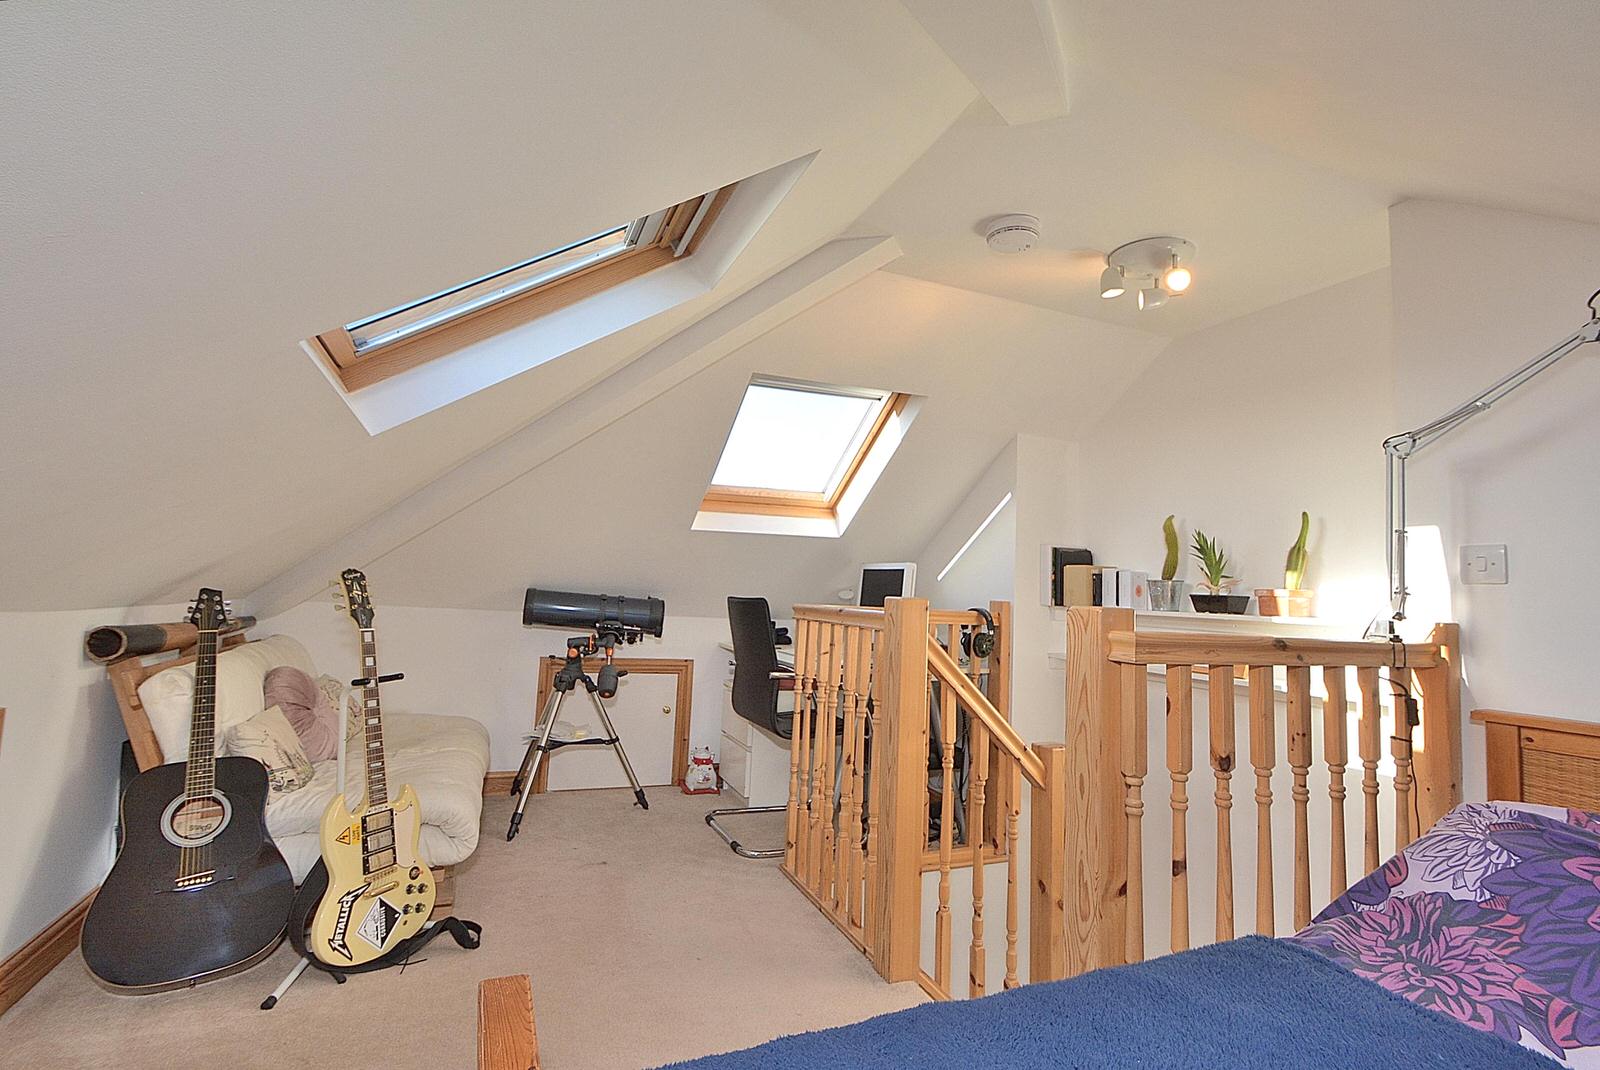 Loft Conversions What You Need To, How Much Does It Cost To Convert A Loft Into Bedroom Uk